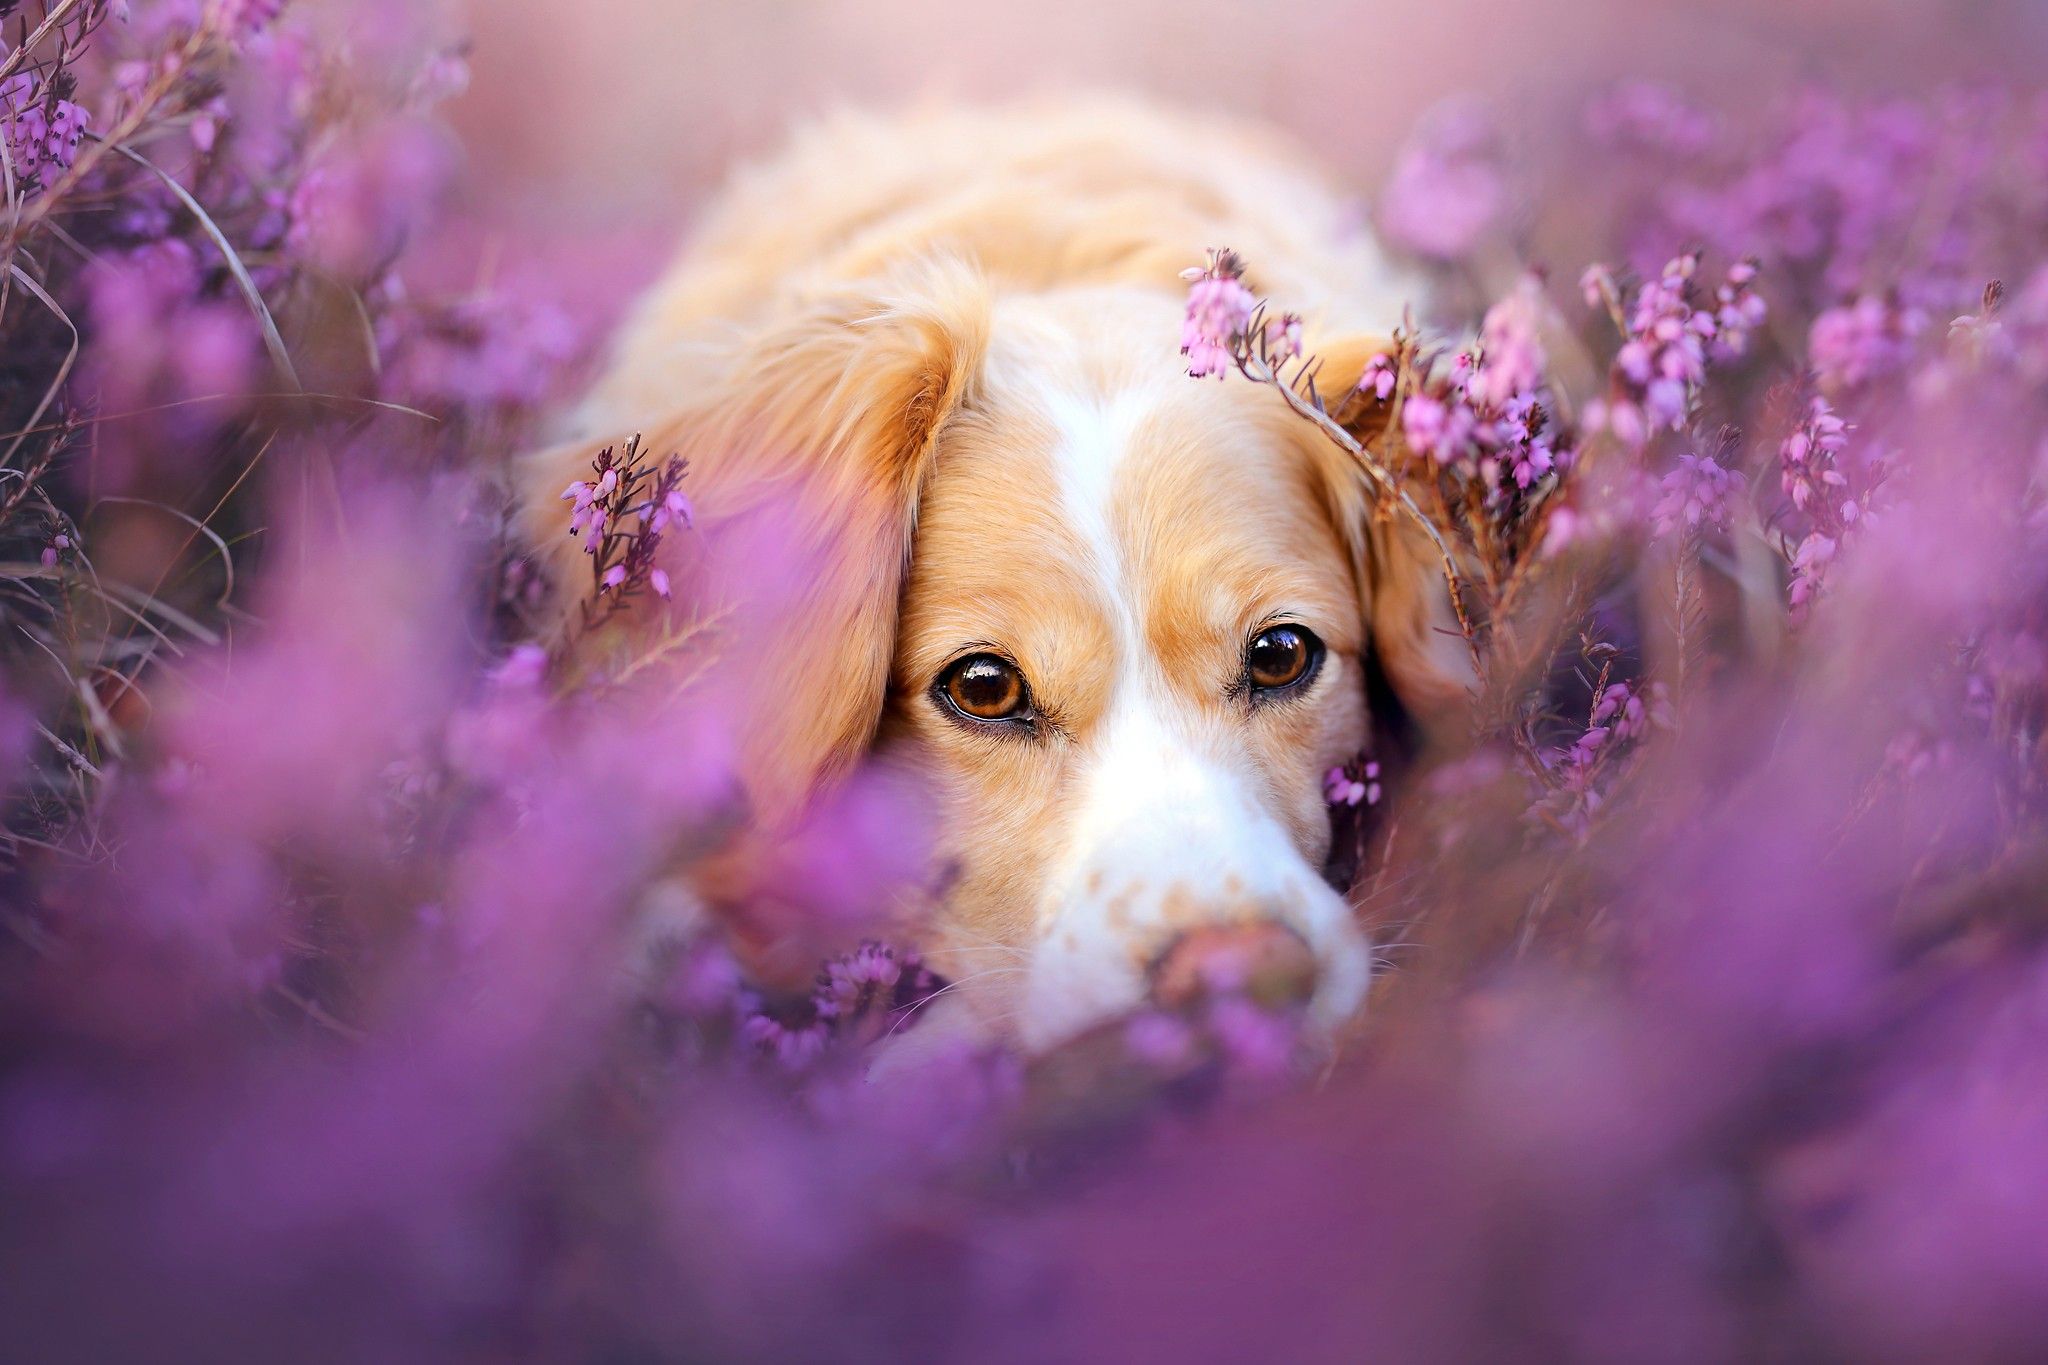 Cute Dog In Flowers, HD Animals, 4k Wallpaper, Image, Background, Photo and Picture